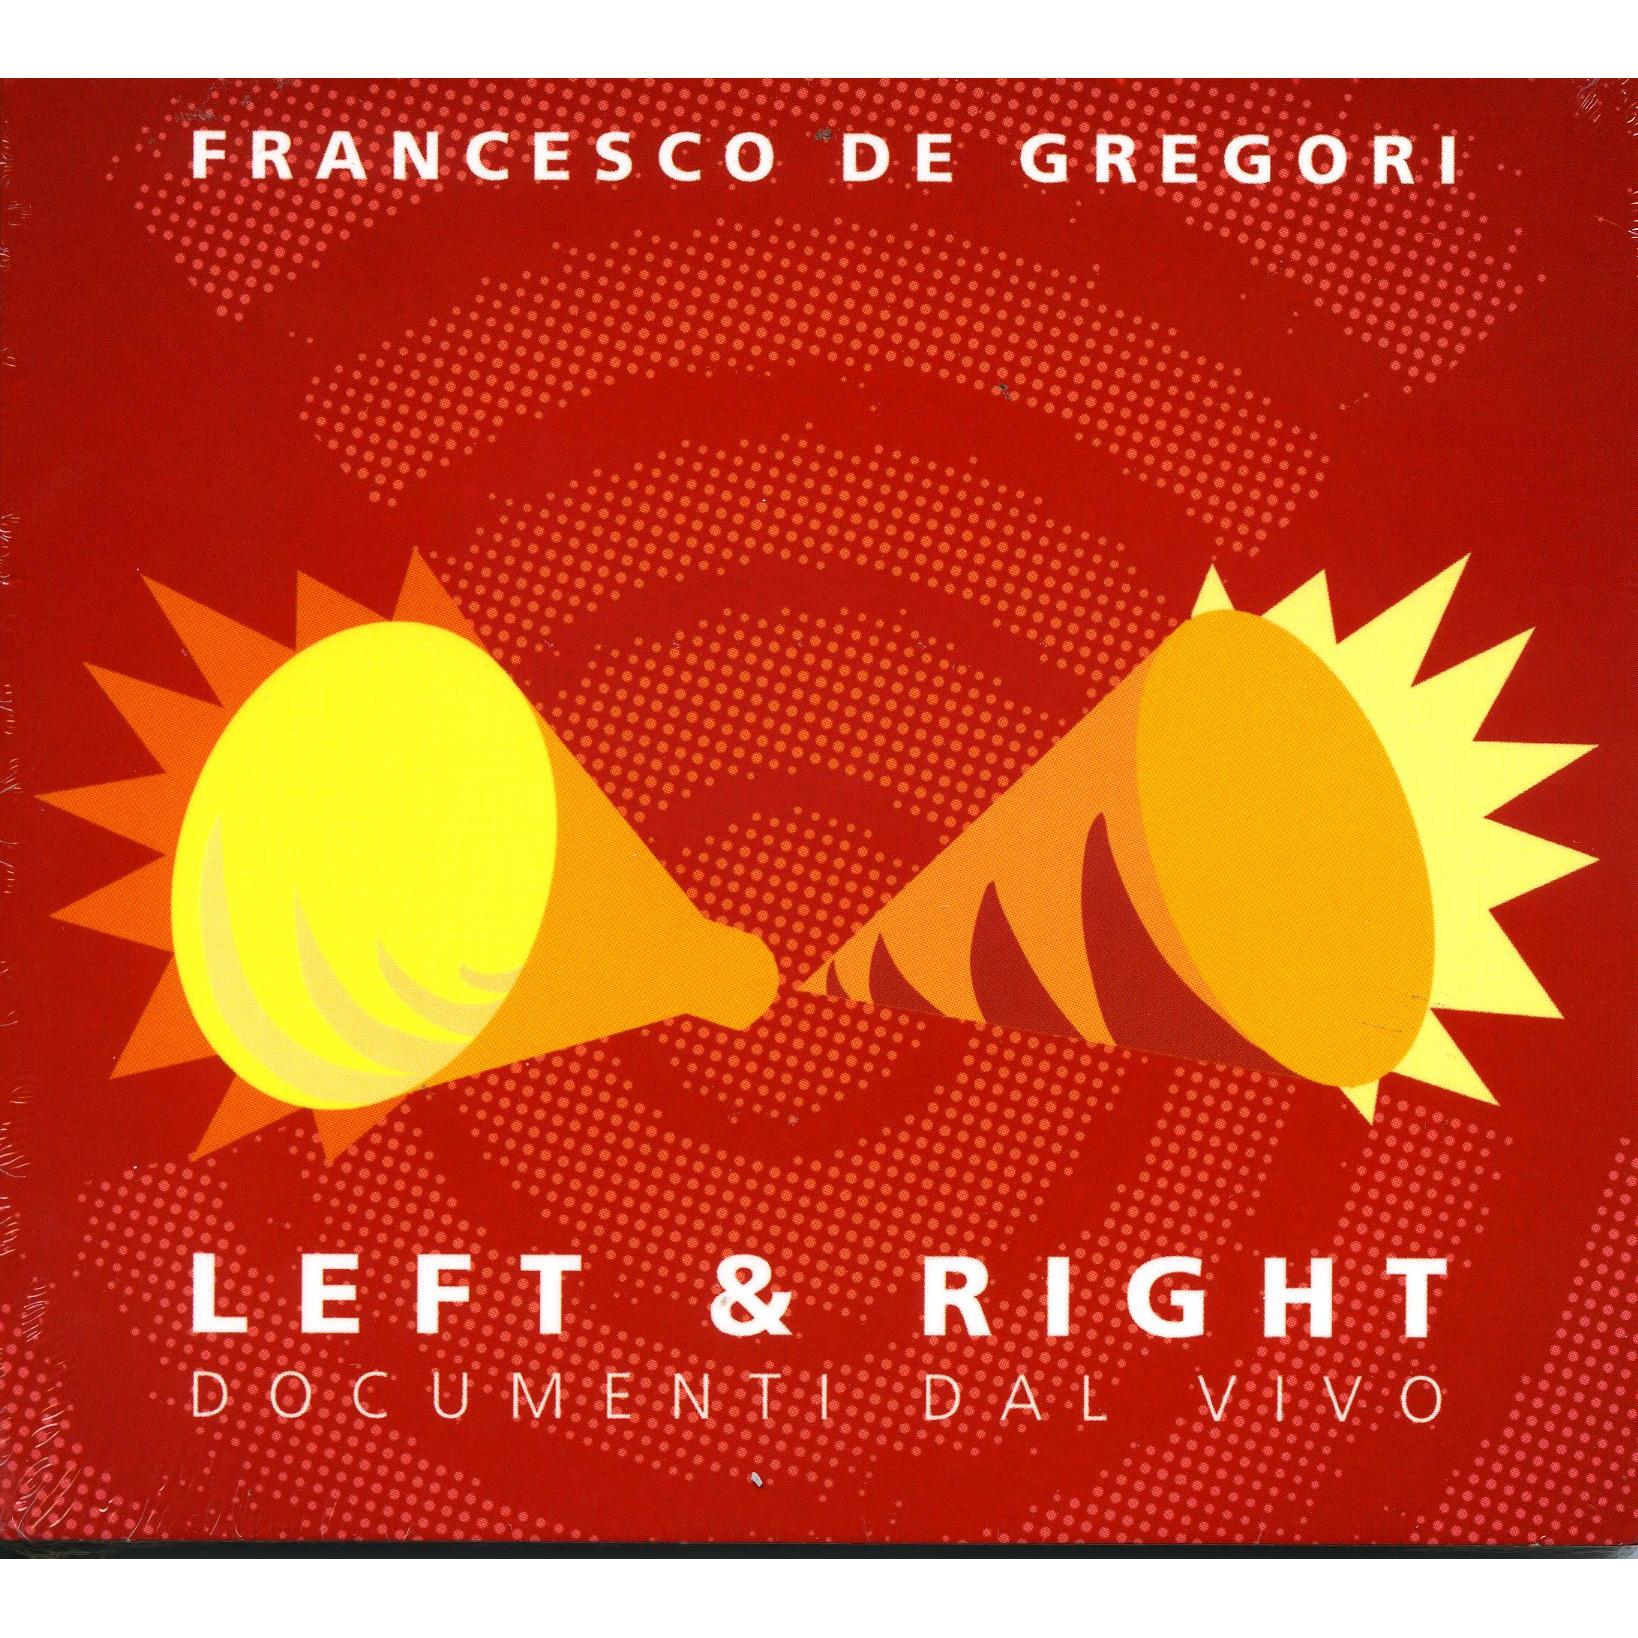 LEFT AND RIGHT